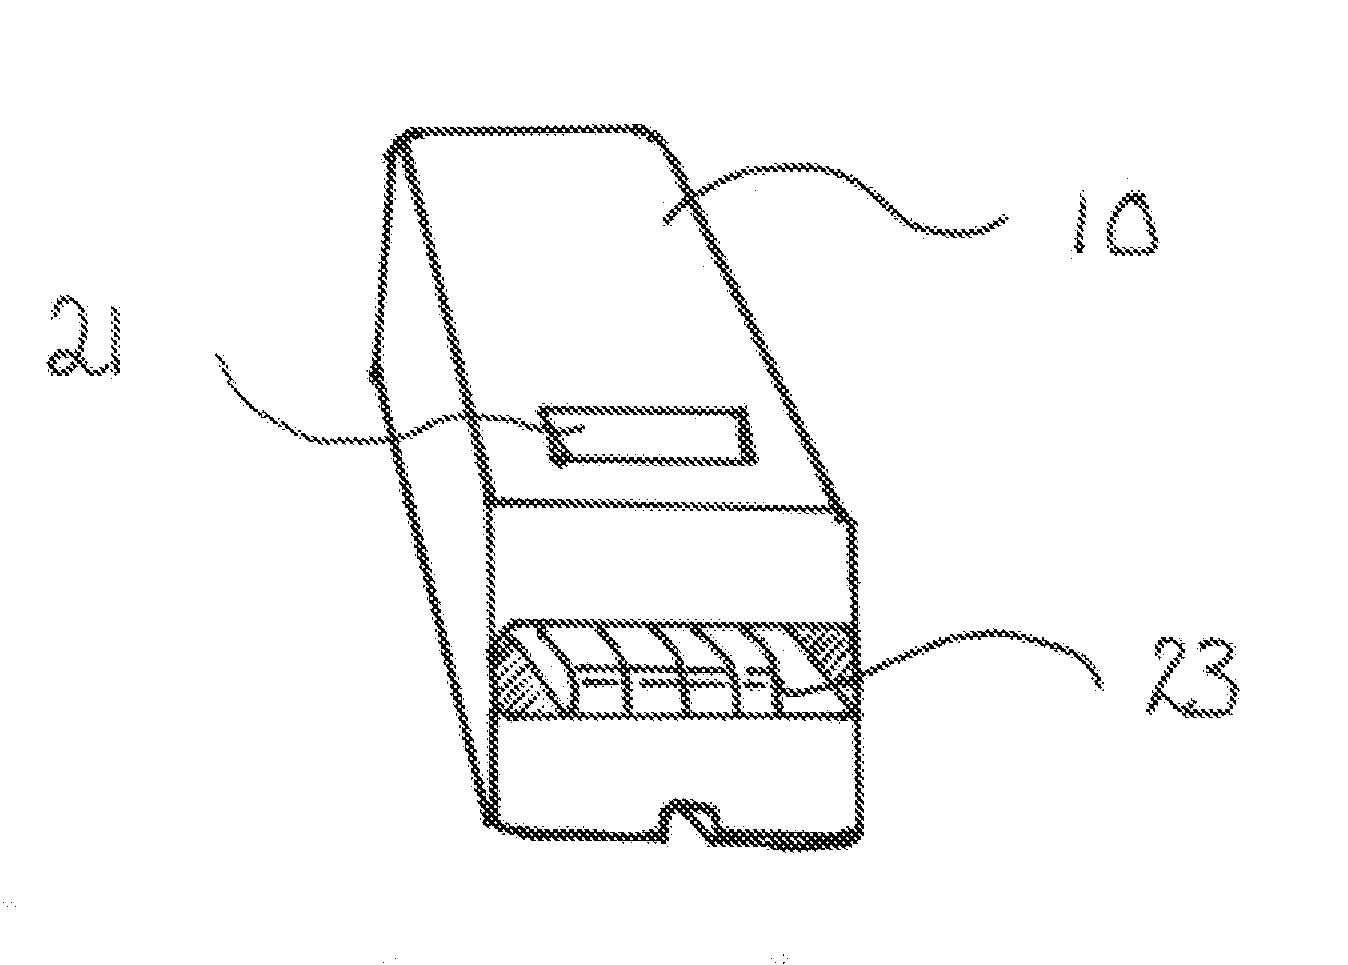 Apparatus for Irrigation Controller Expansion through Non-Removable Circuit Board Modules